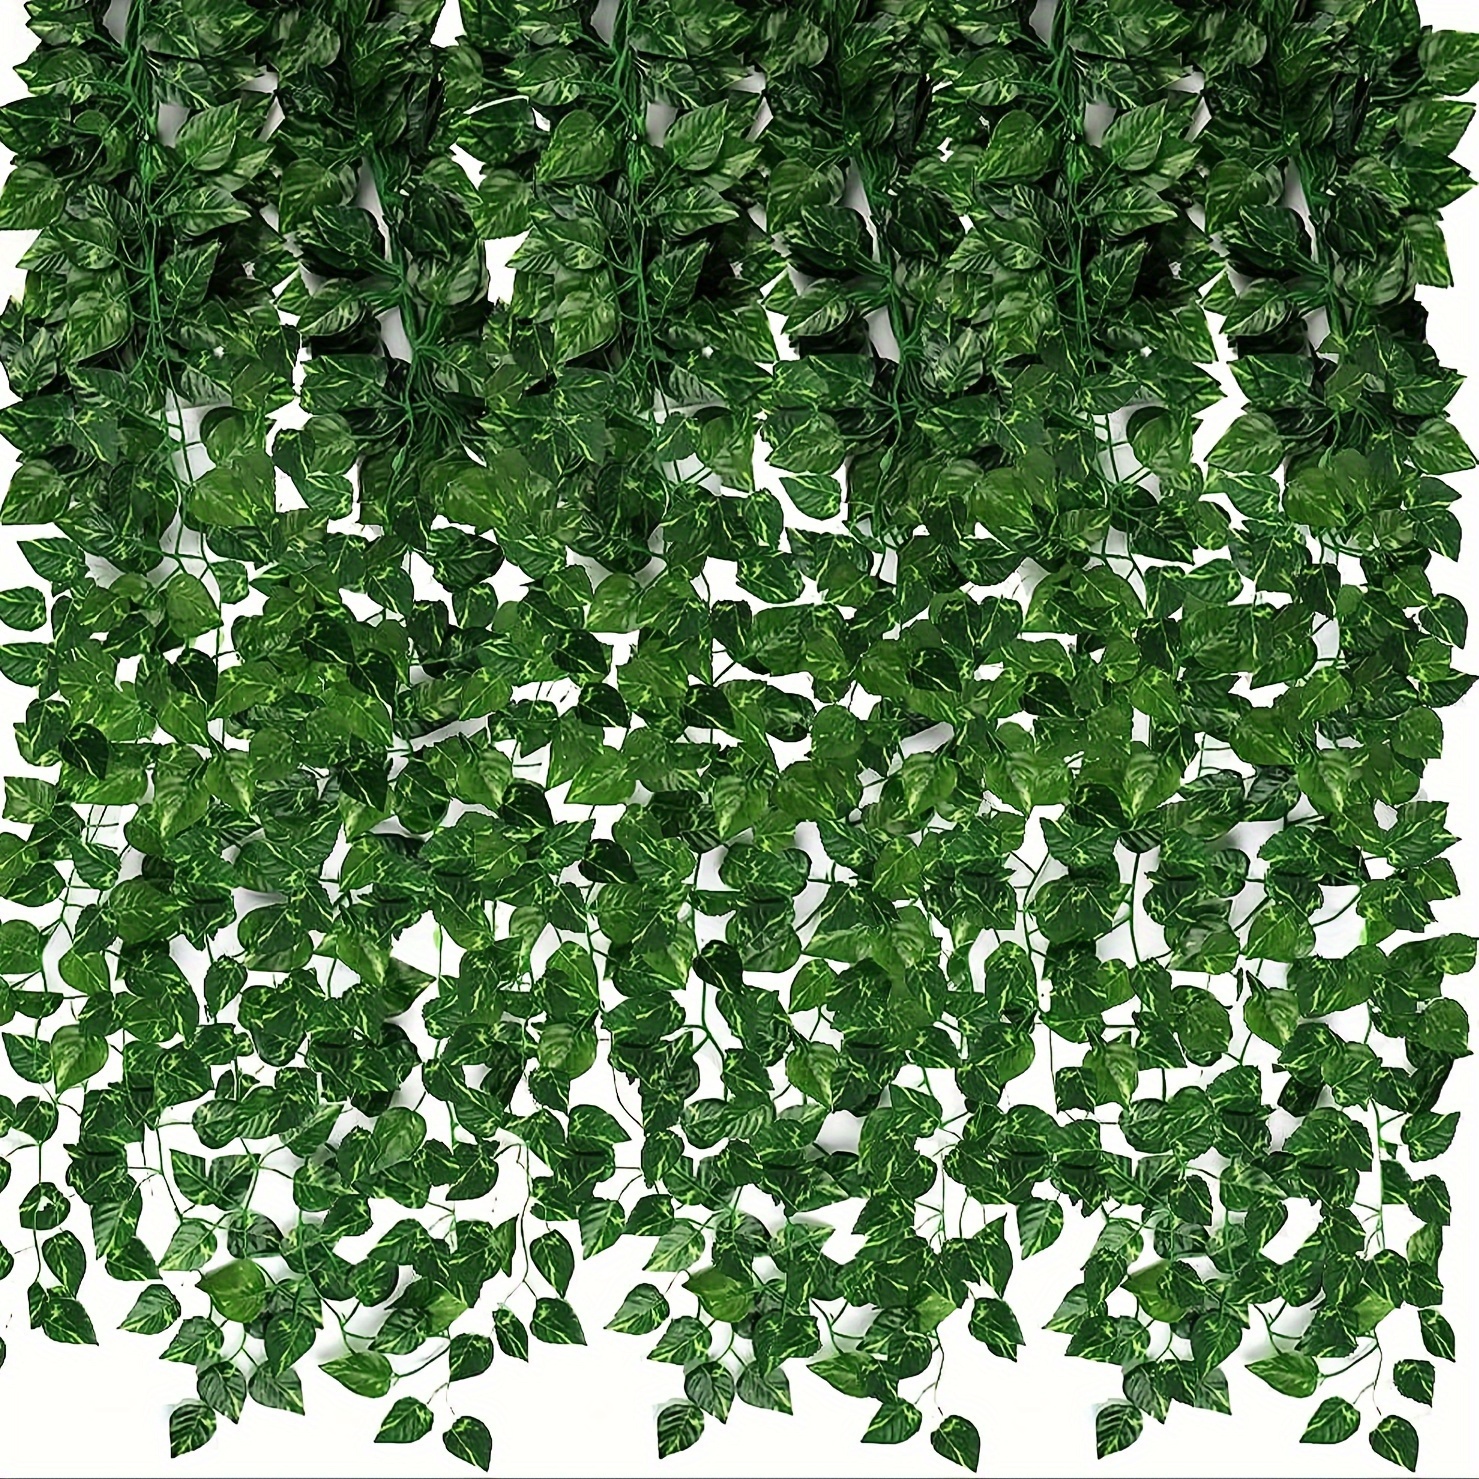 

3 Pack, 20ft Artificial Ivy Greenery Garland, Fake Vines Hanging Plants Backdrop For Room Bedroom Wall Decor, Green Leaves For Jungle Theme Christmas Party Wedding Decoration